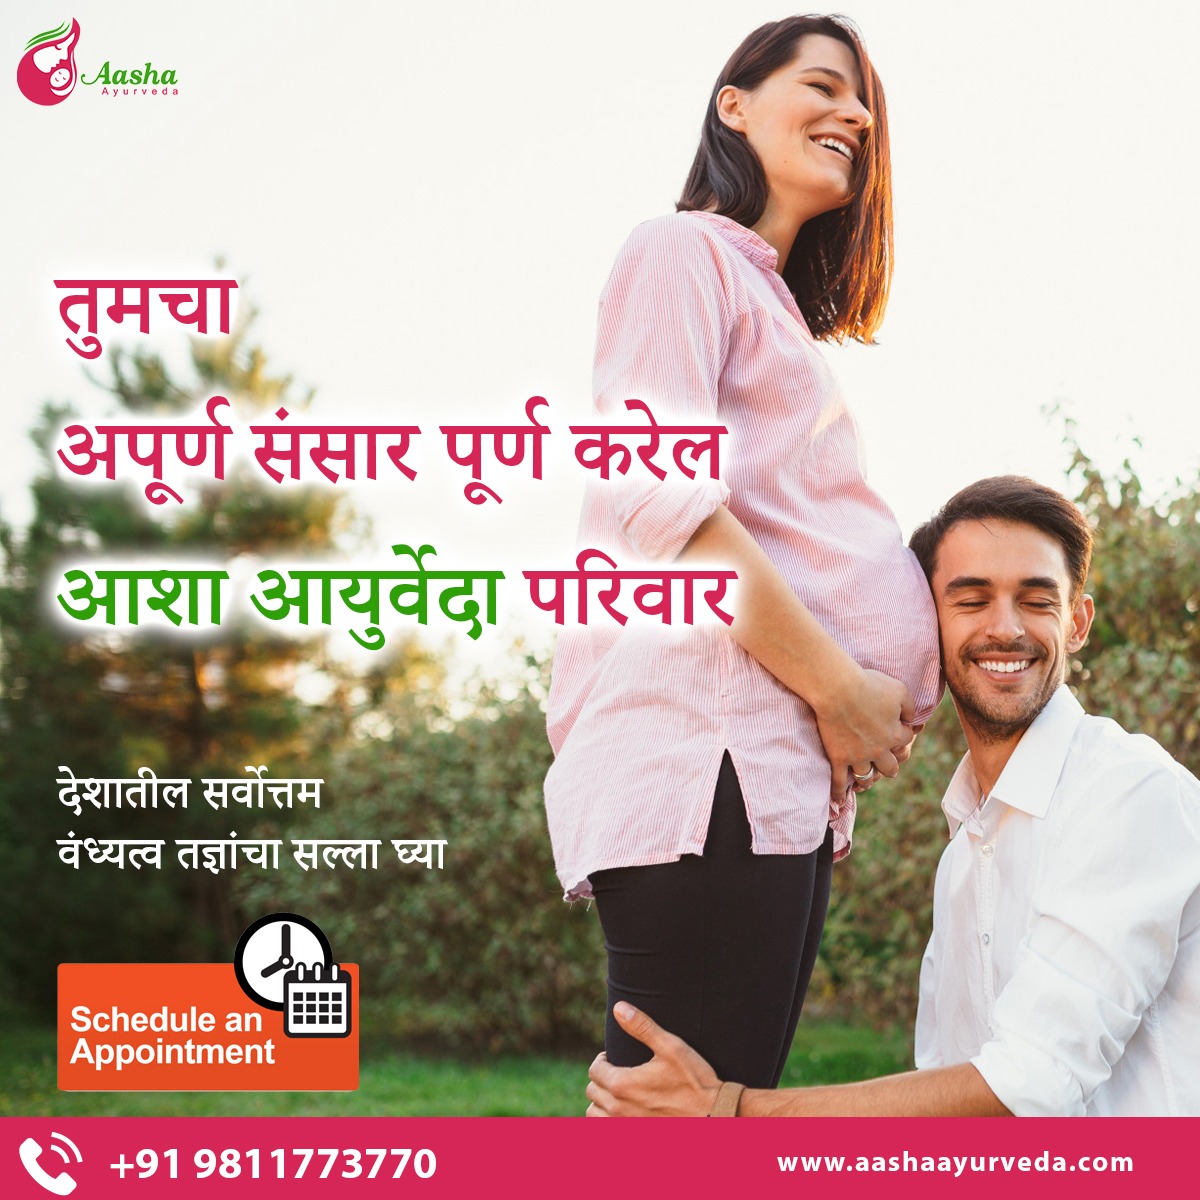 Schedule an
Appointment

 

Q +919811773770 www.aashaayurveda.com